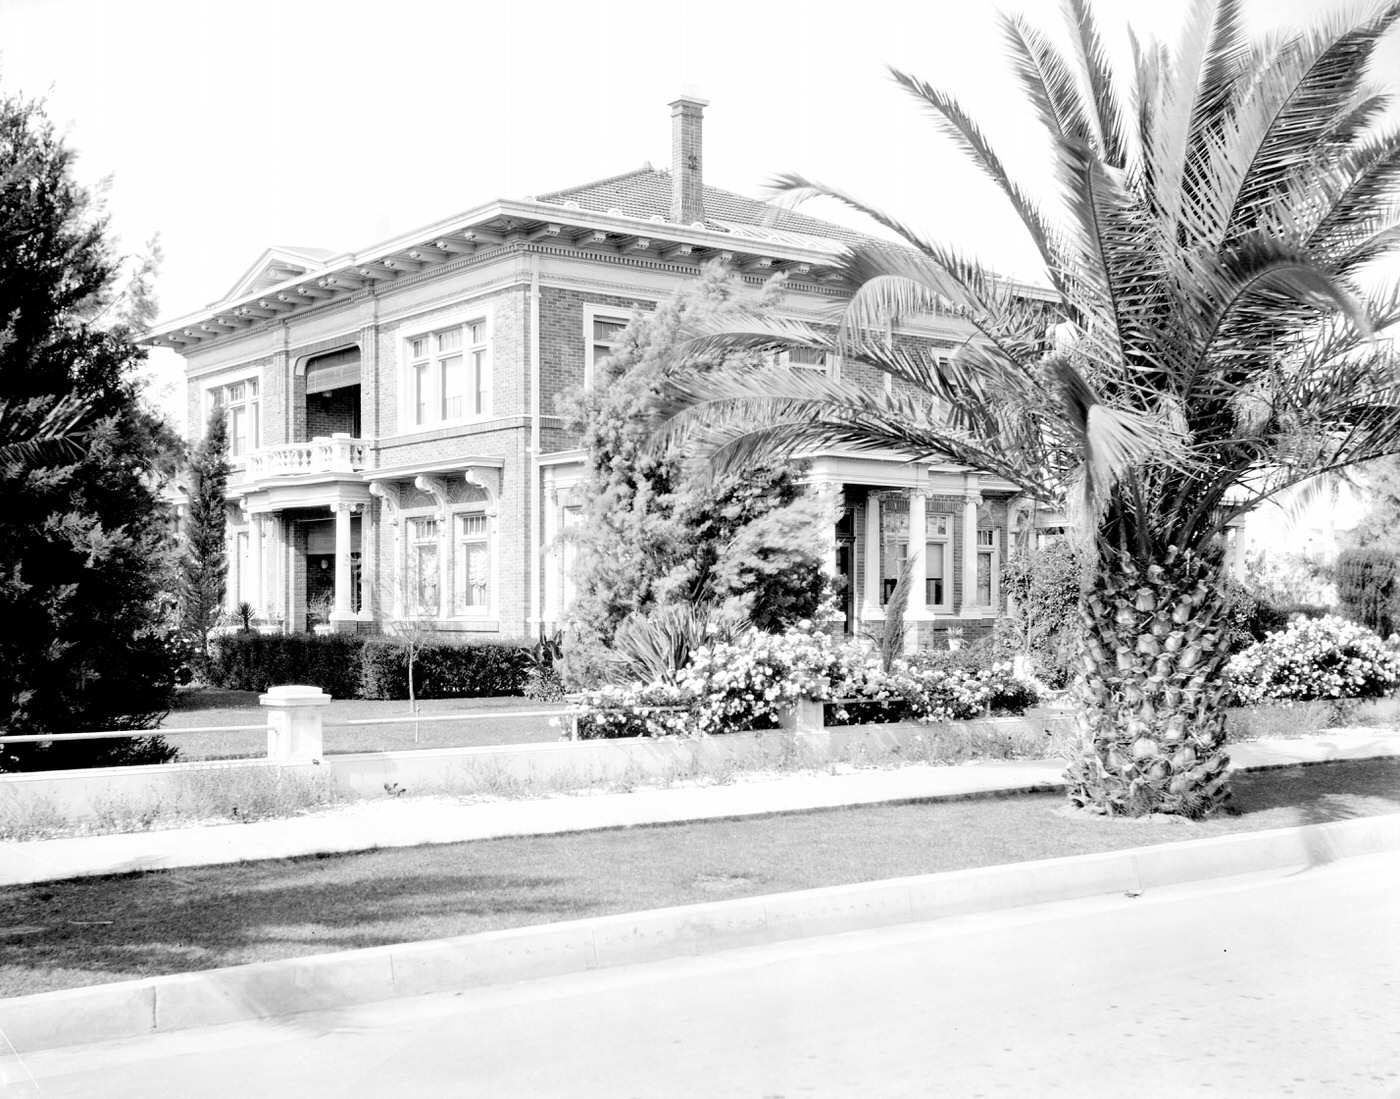 Diamond Residence Exterior, 1930s. This home was located at 1807 N. Central Ave. in Phoenix. In 1931, it belonged to Isaac and Nellie Diamond